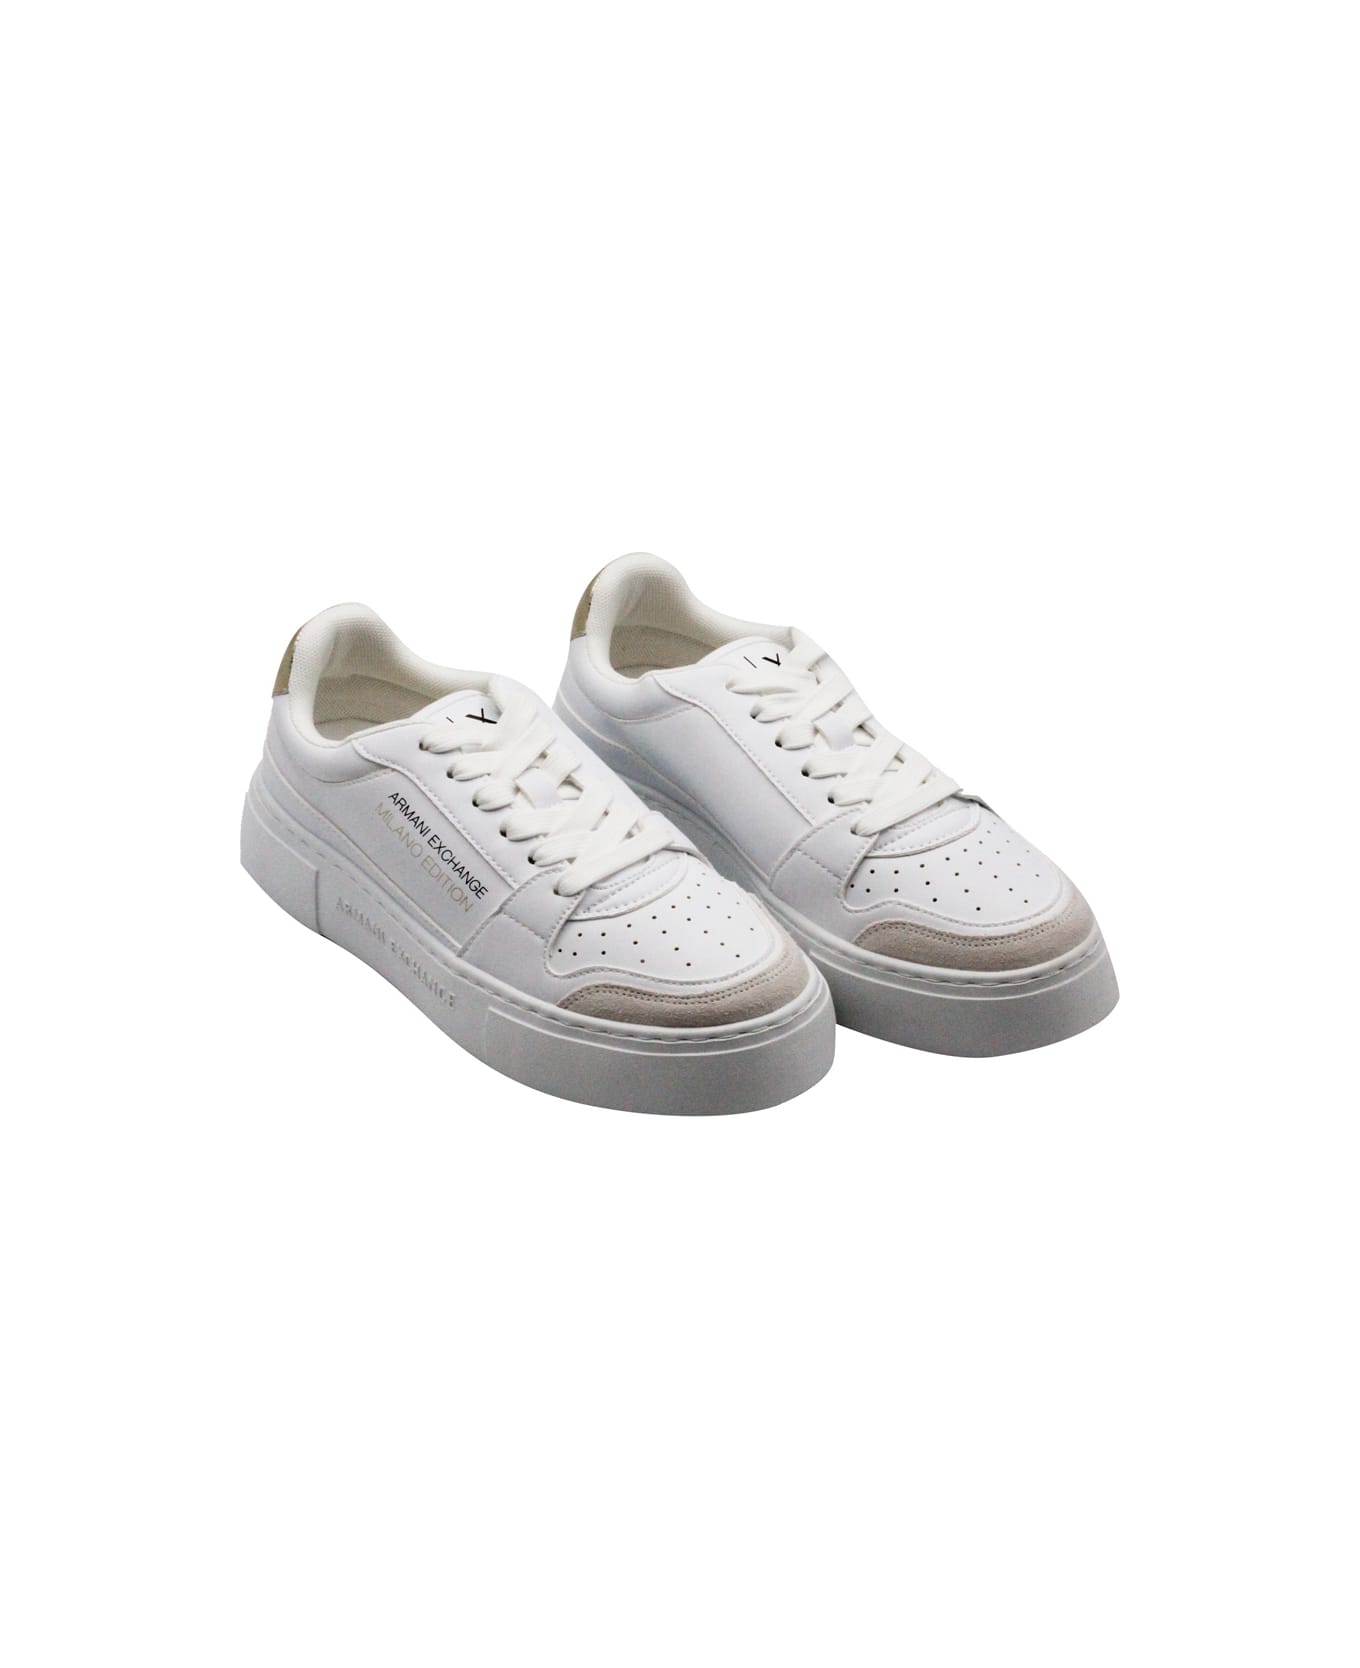 Armani Collezioni Leather Sneakers With Matching Box Sole And Lace Closure. Small Golden Rear Logo And Side Writing - White